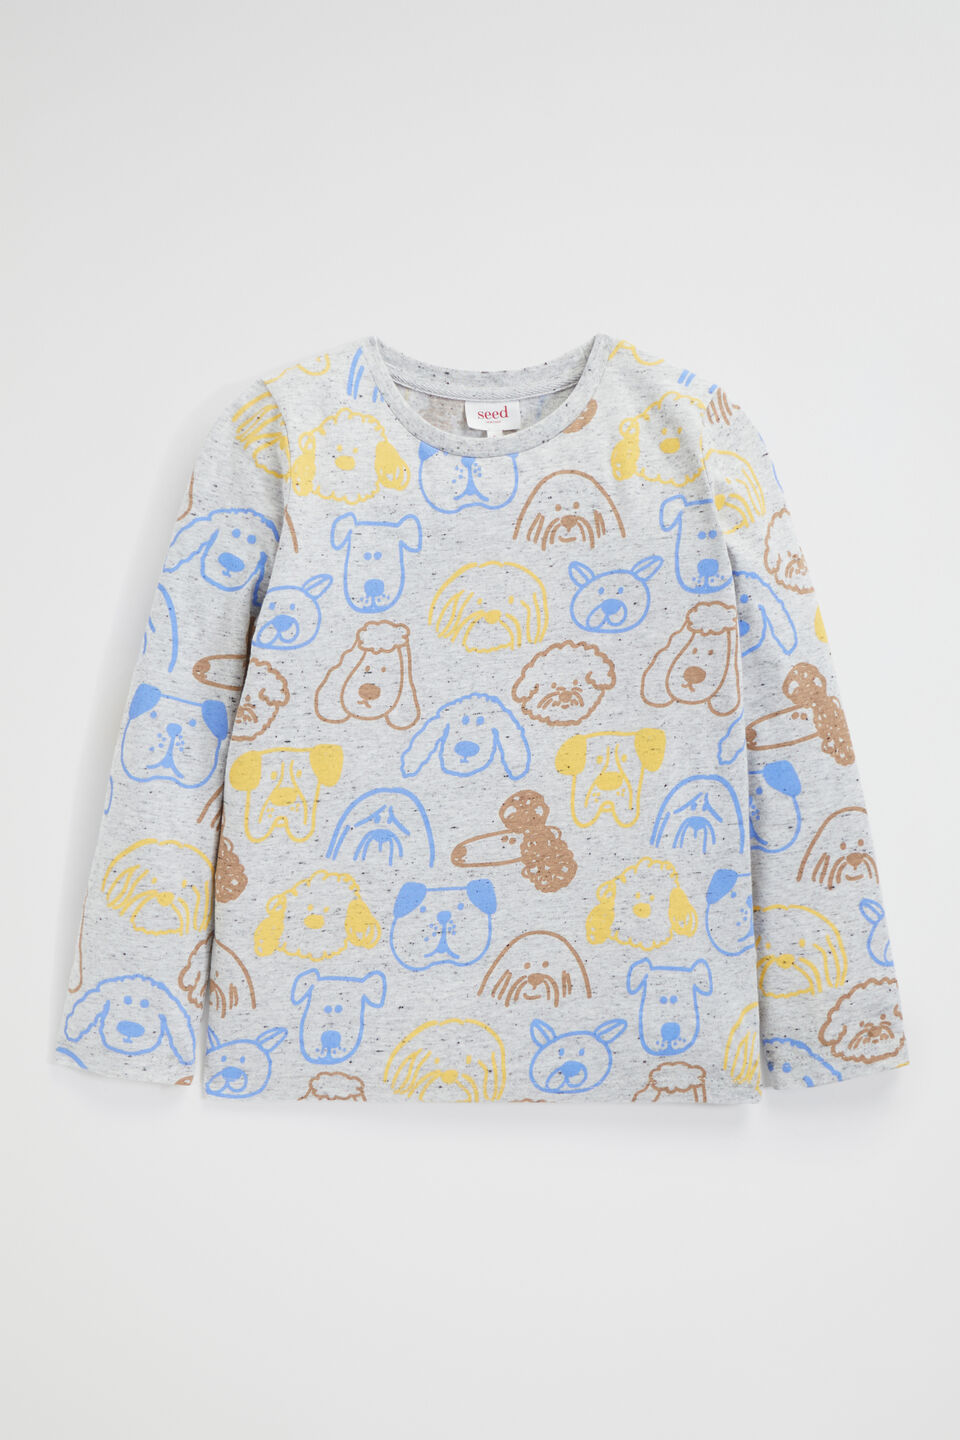 Dog Faces Tee  Cloudy Marle